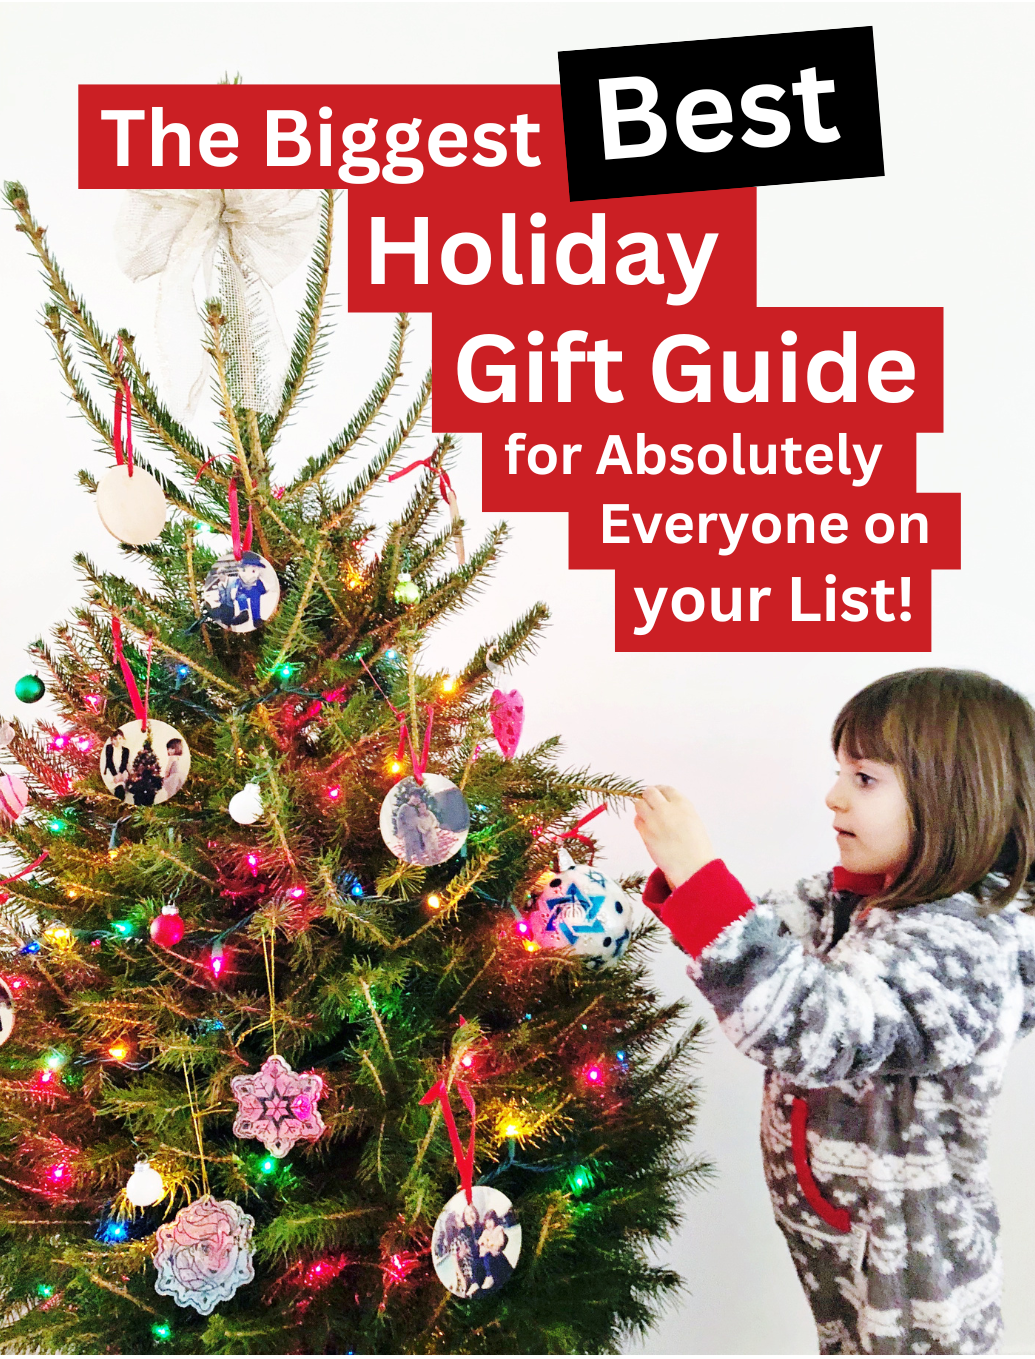 14 cool custom photo gifts for everyone on your holiday list: 2015 Holiday  Tech Guide